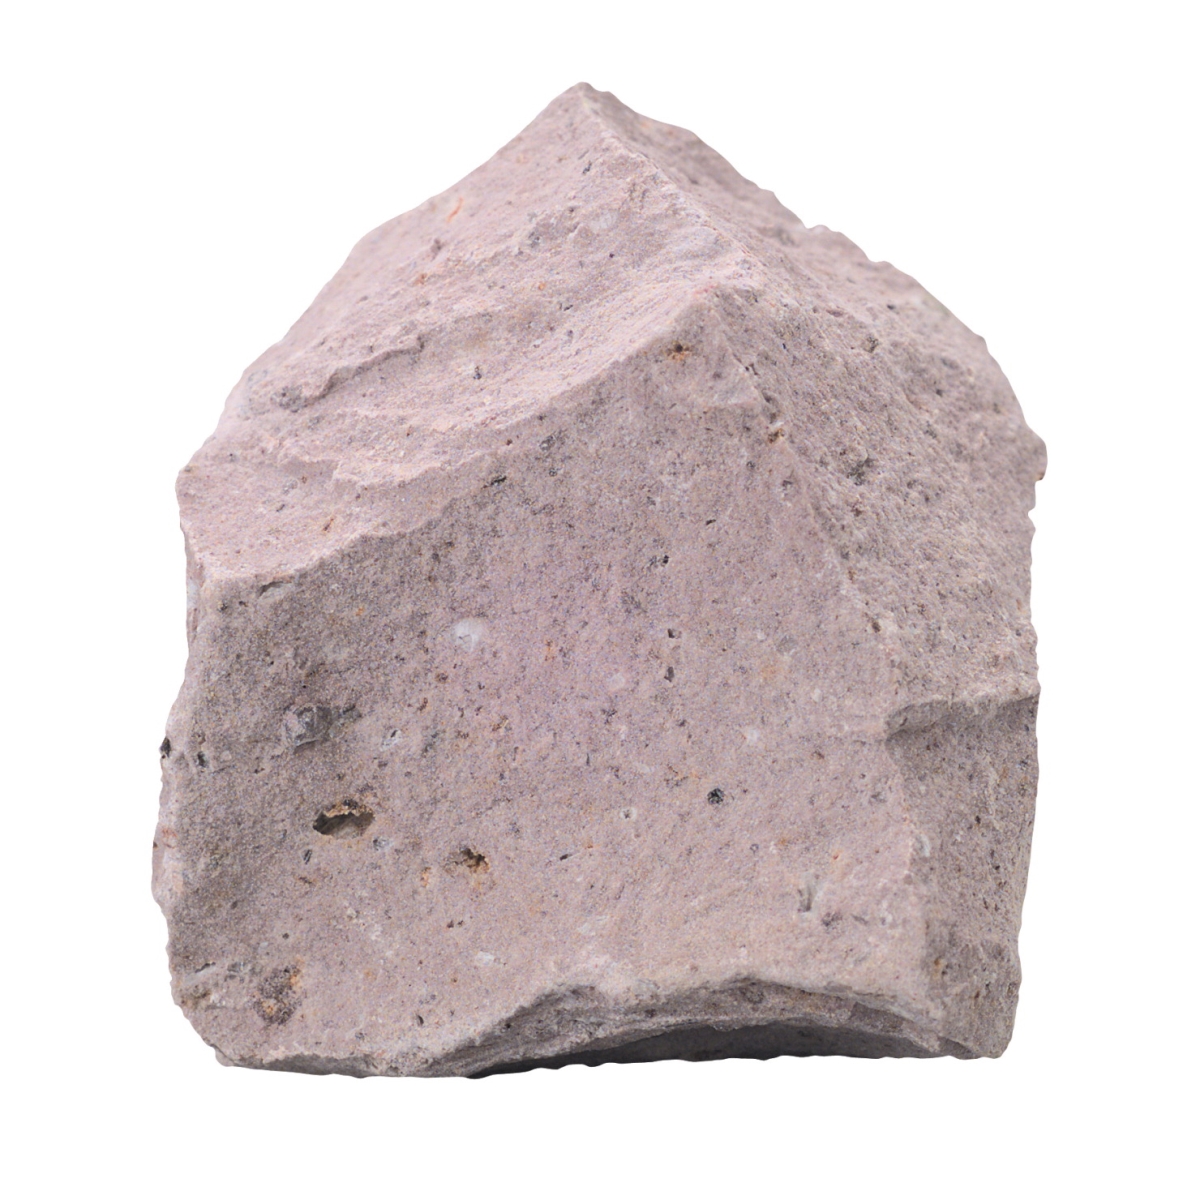 586342 Scott Resources Student Fine-grained Rhyolite Igneous - Pack Of 10